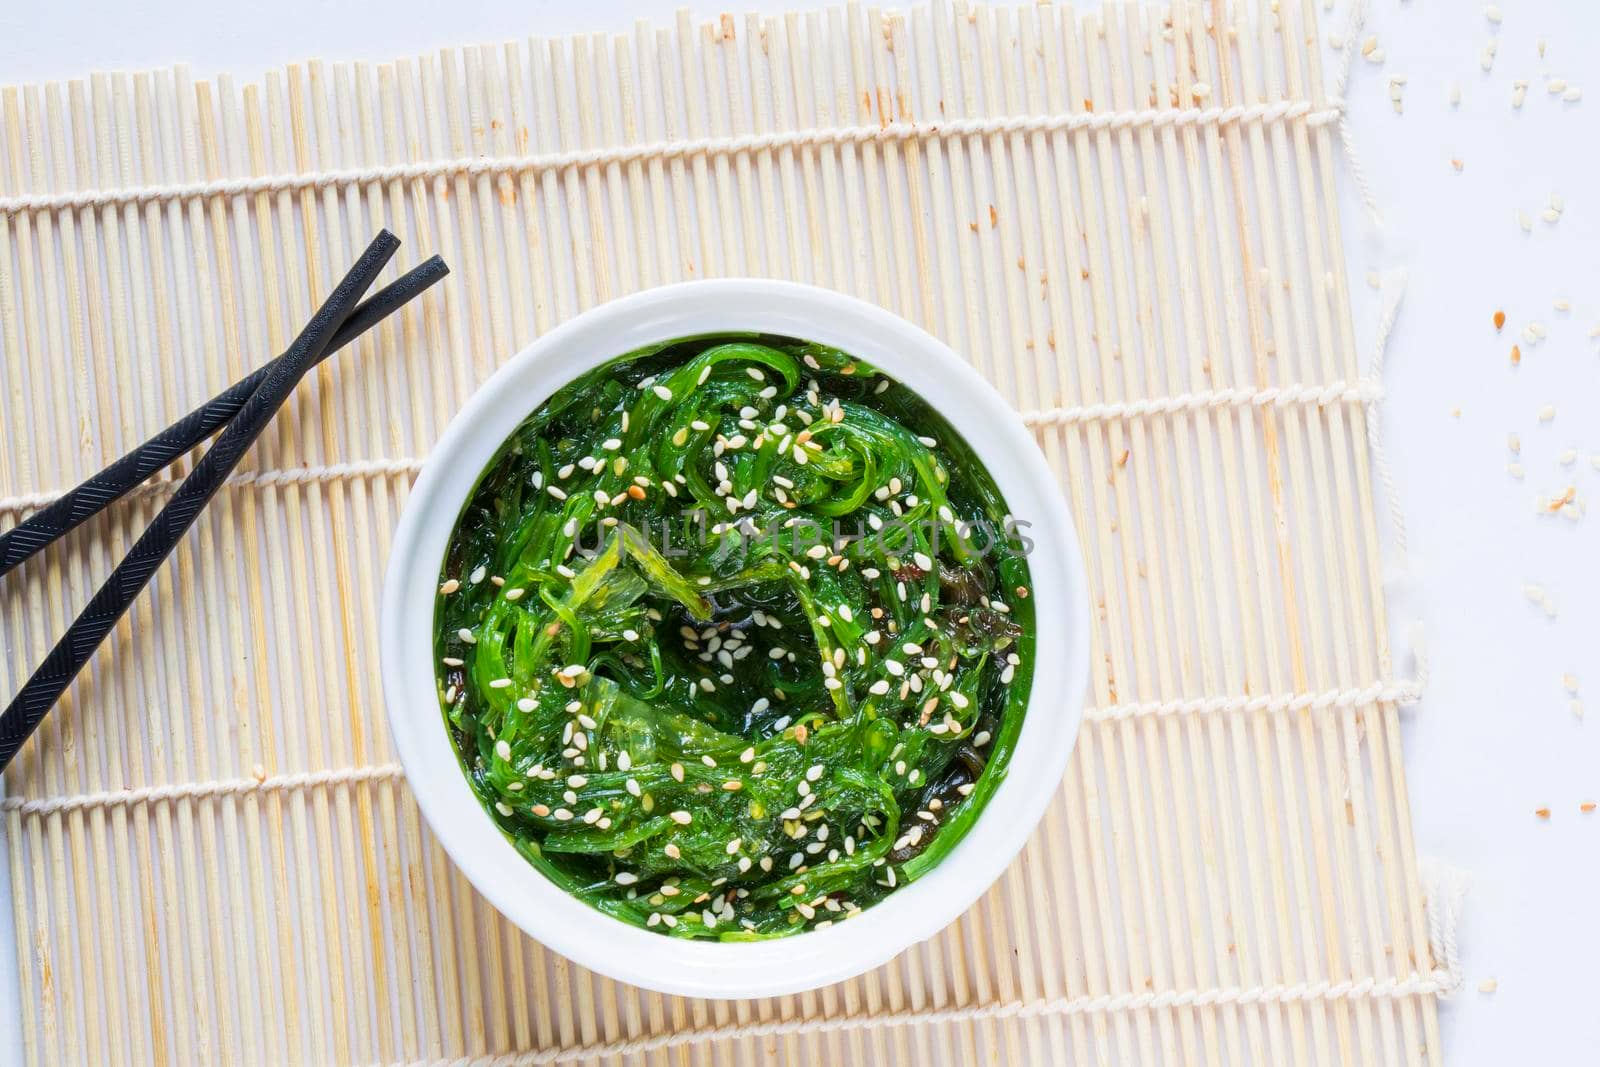 Wakame in the white bowl and chopsticks